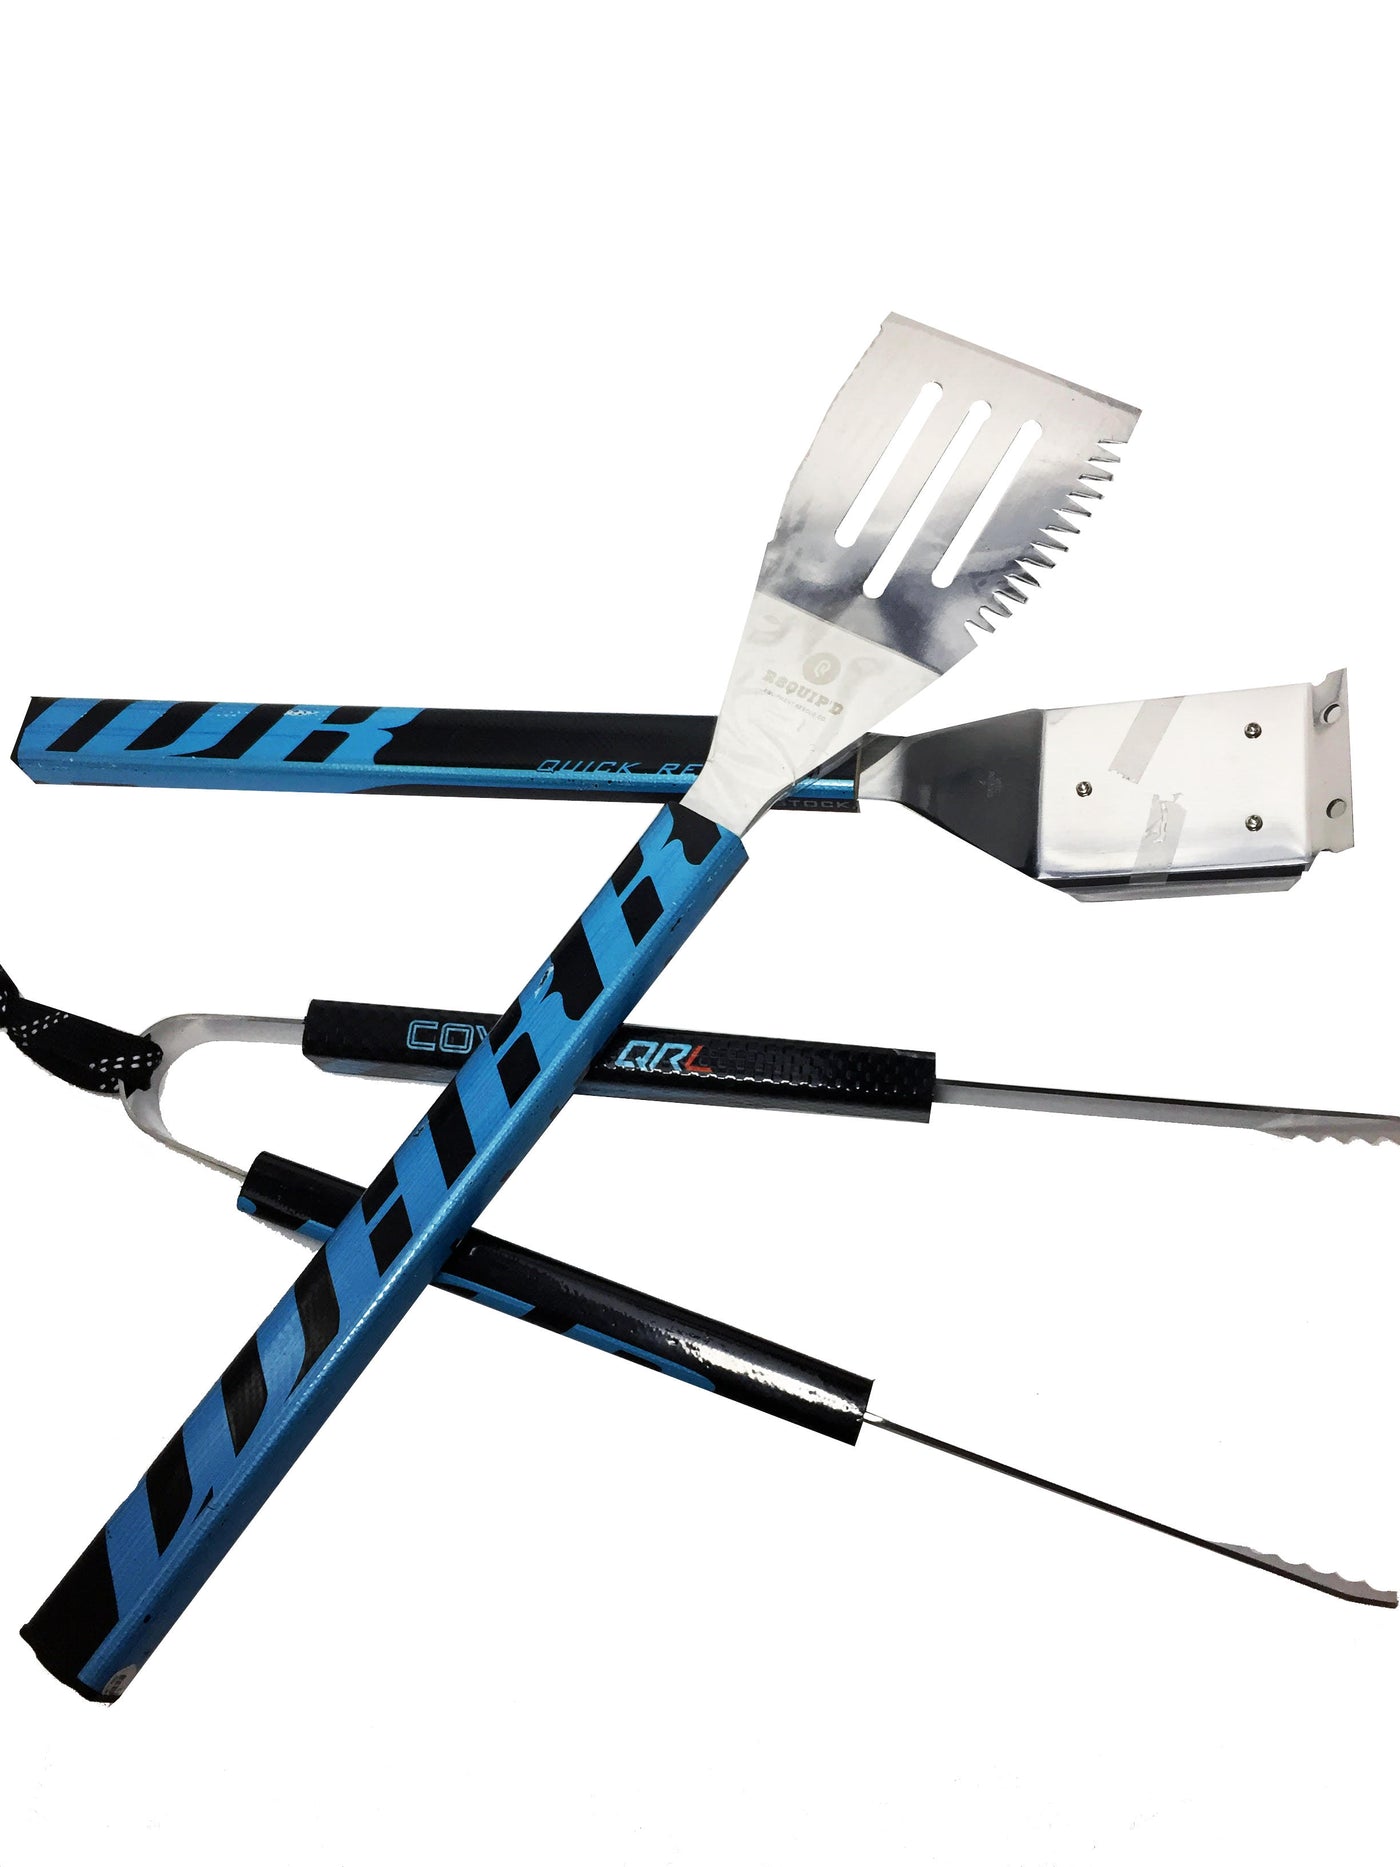 3 piece BBQ Set  BBQ Set - Requip'd formerly Hat Trick BBQ - Made from hockey sticks and hockey gear - perfect gifts for hockey fans